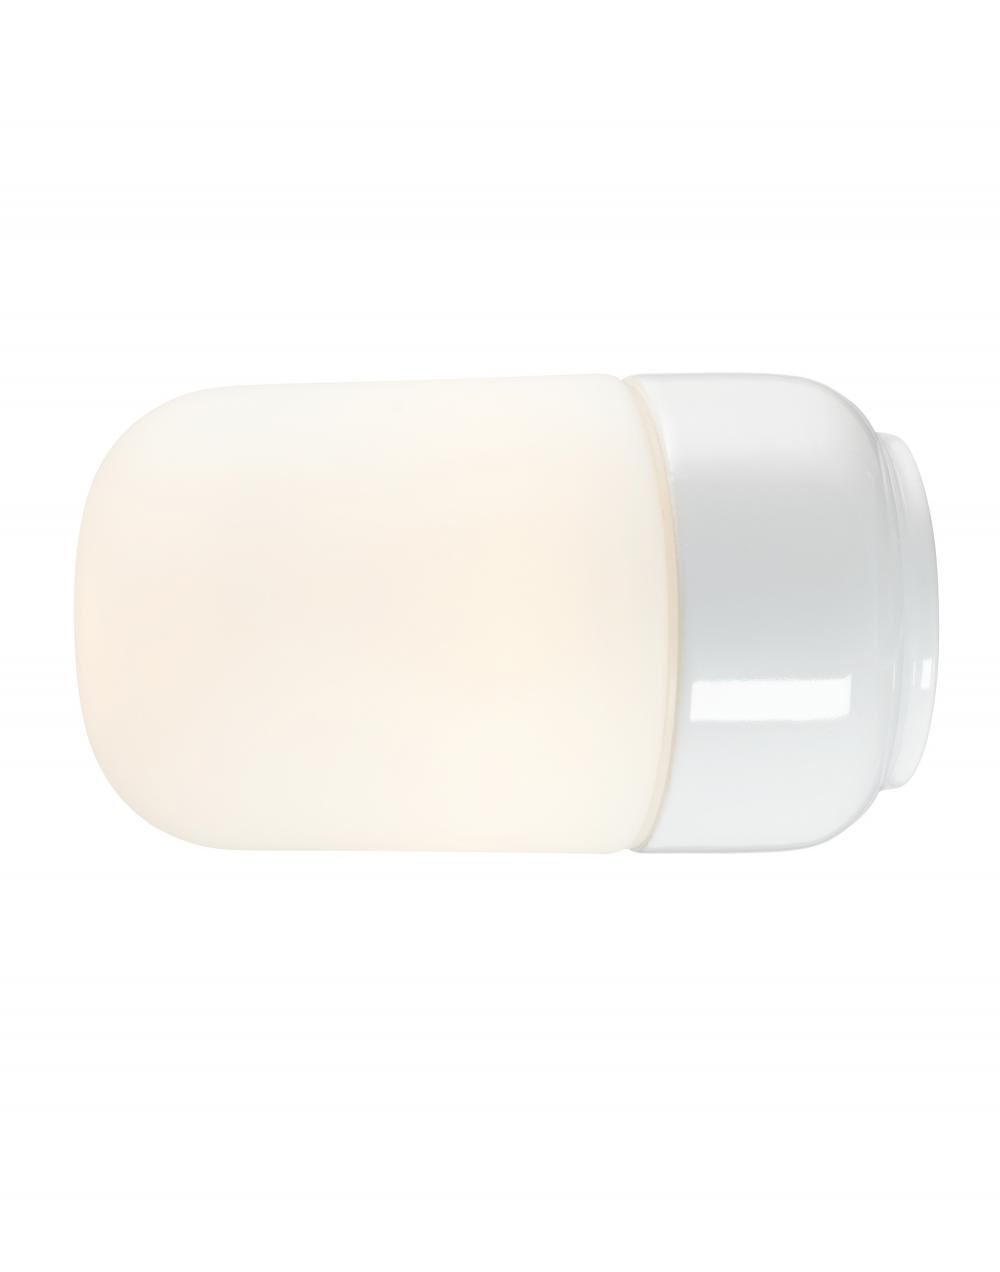 Ohm Wall Ceiling Light 170 White Opal